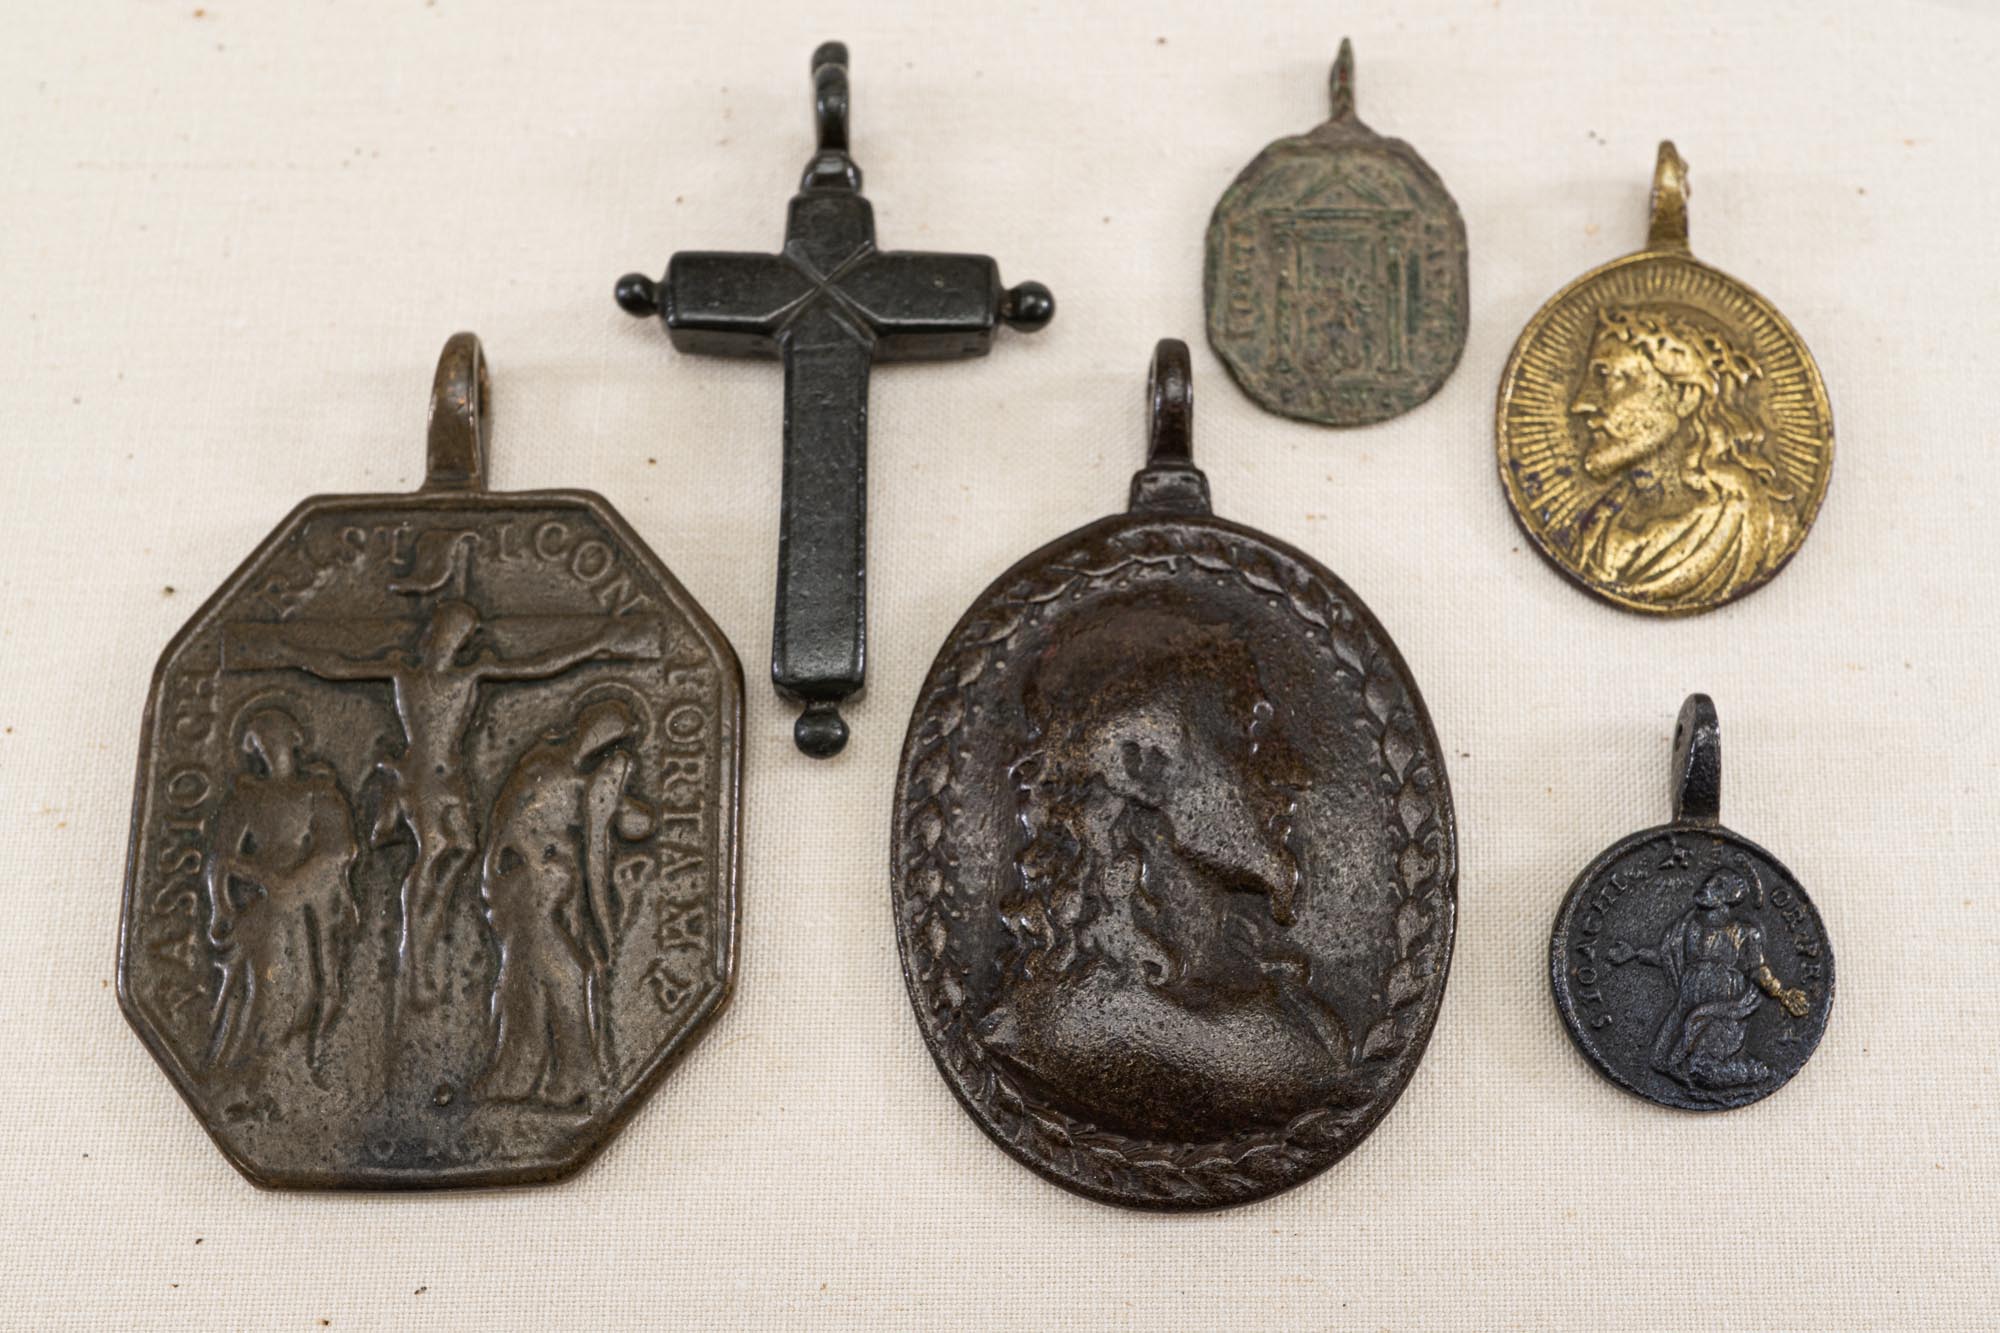 These religious medallions are reflective of the importance the Spanish placed on maintaining and expressing their faith as they expanded their empire. Museum of the Coastal Bend Victoria, TX